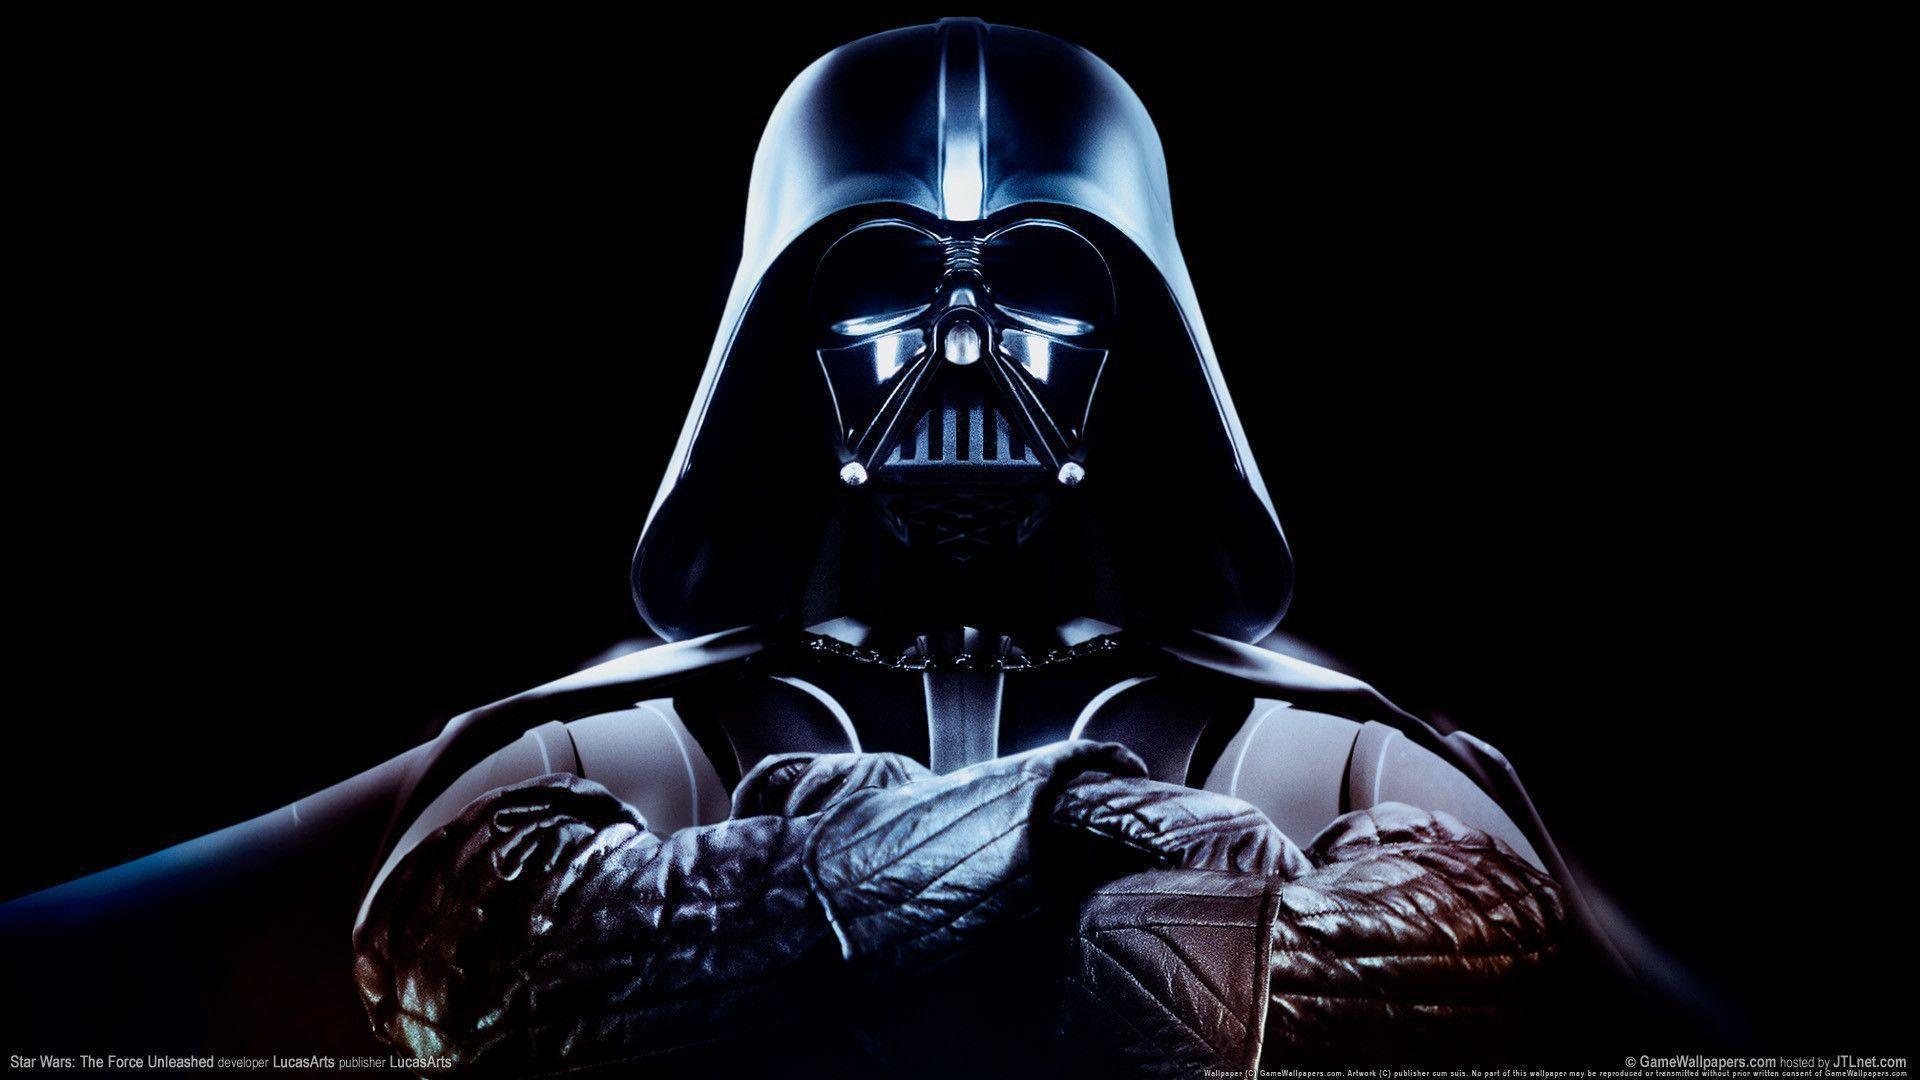 Darth Vader Star Wars May the Fourth Be With You Wallpaper for Phone